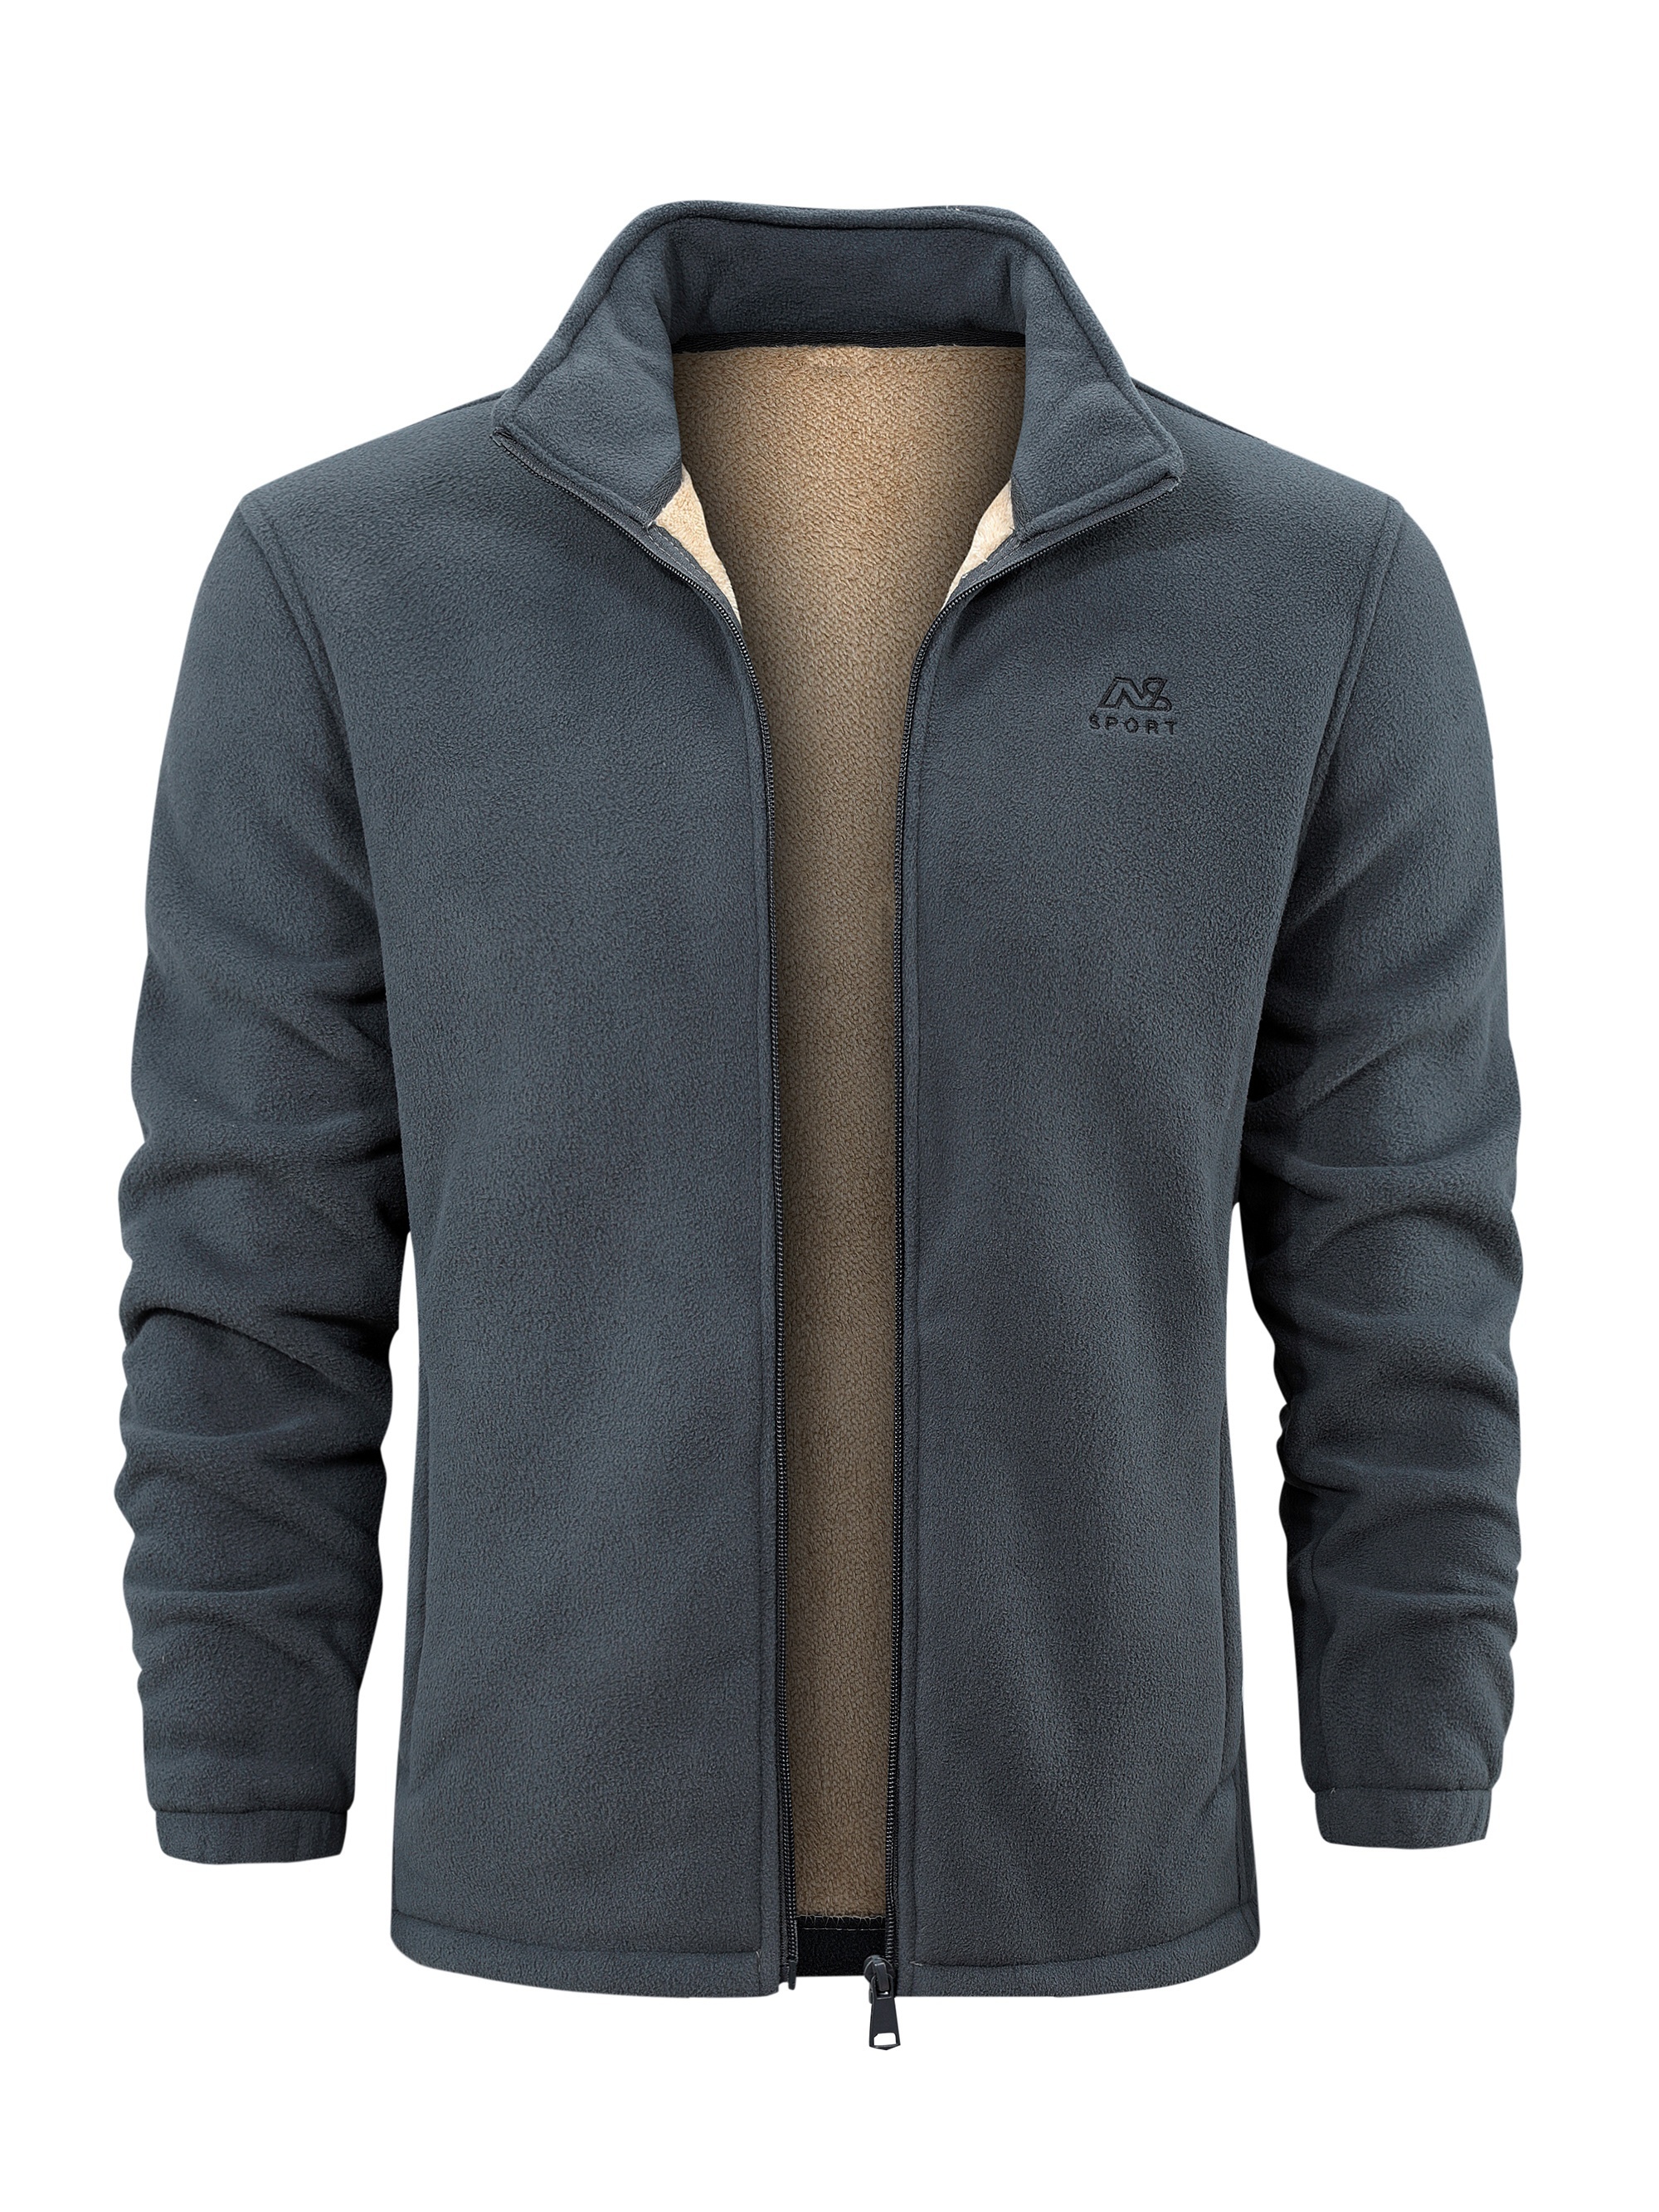 warm stand collar fleece jacket mens casual comfortable solid color zip up jacket coat for fall winter details 12